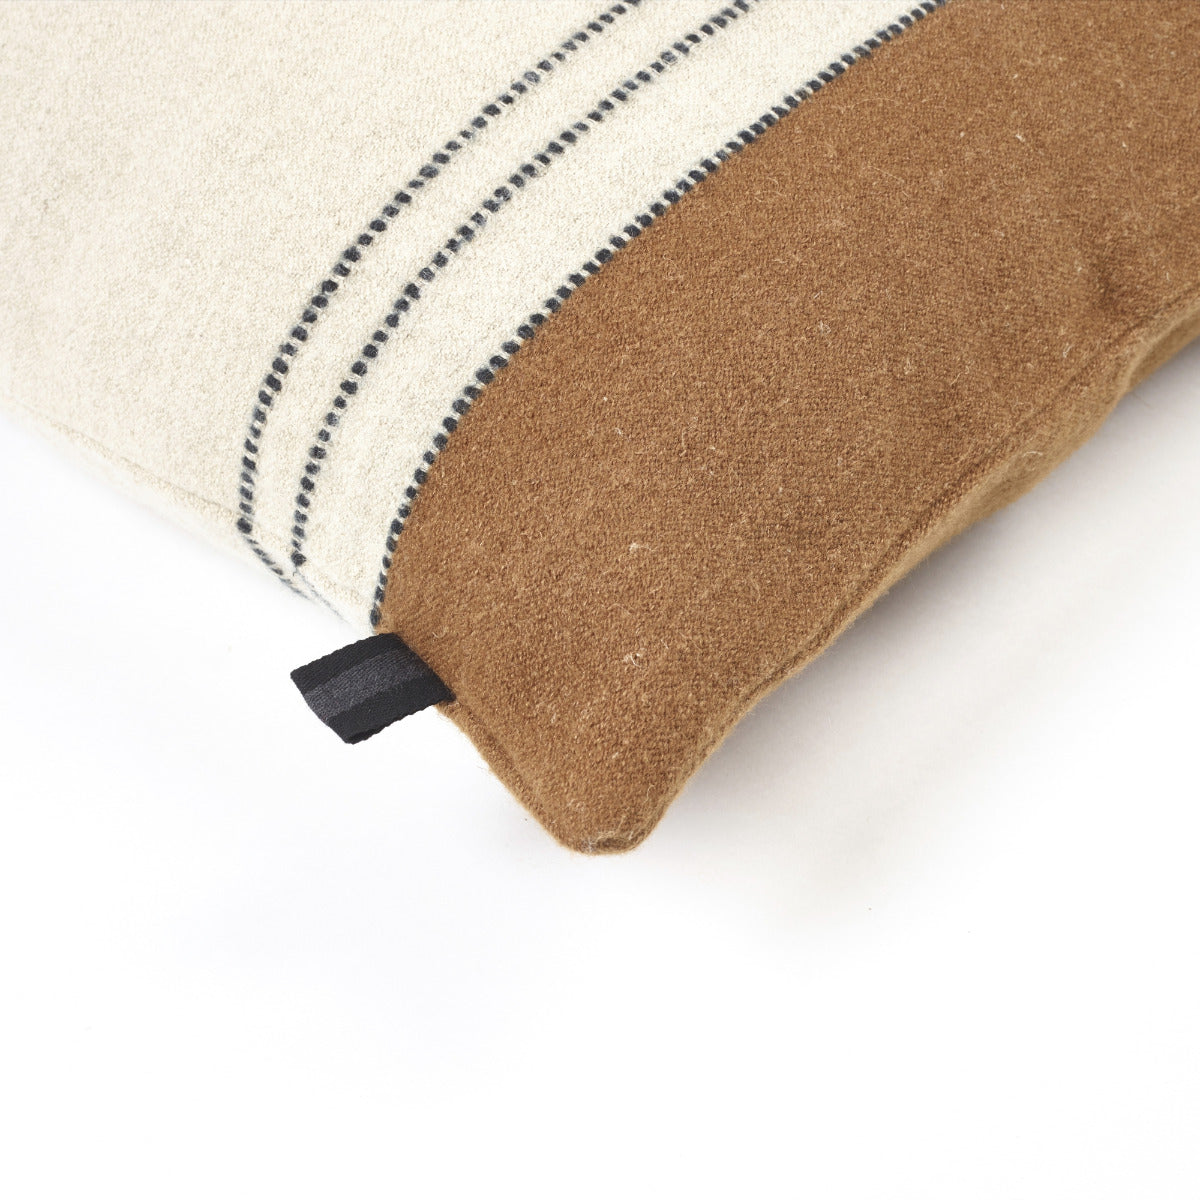 FOUNDRY PILLOW - BEESWAX STRIPE - $210.00